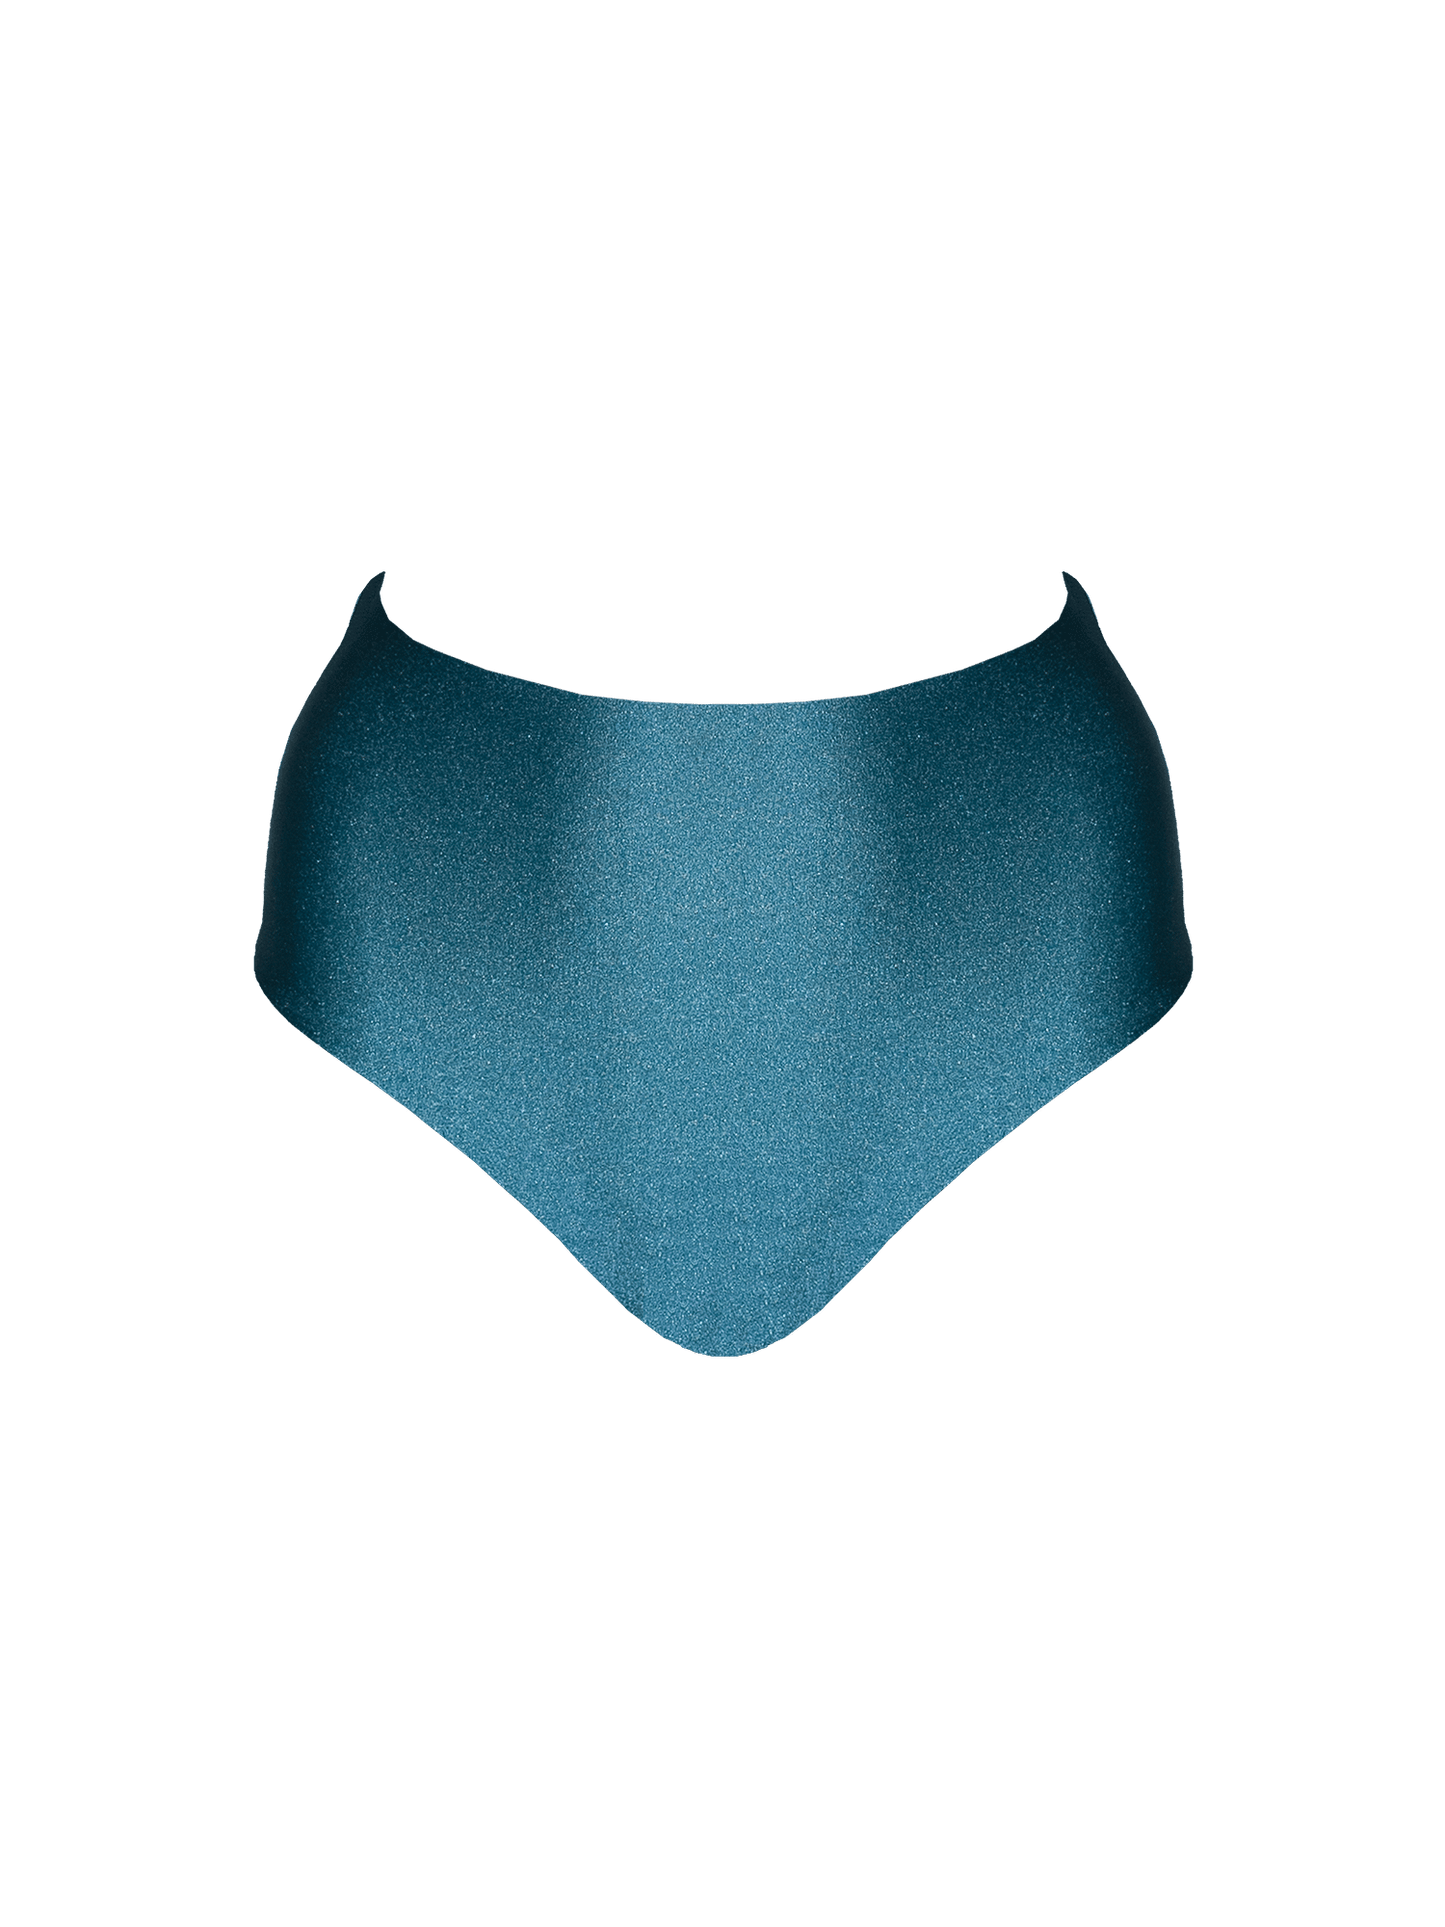 Second Skin|Shimmer ~ Classic High Waisted Pantie - Tourmaline Teal